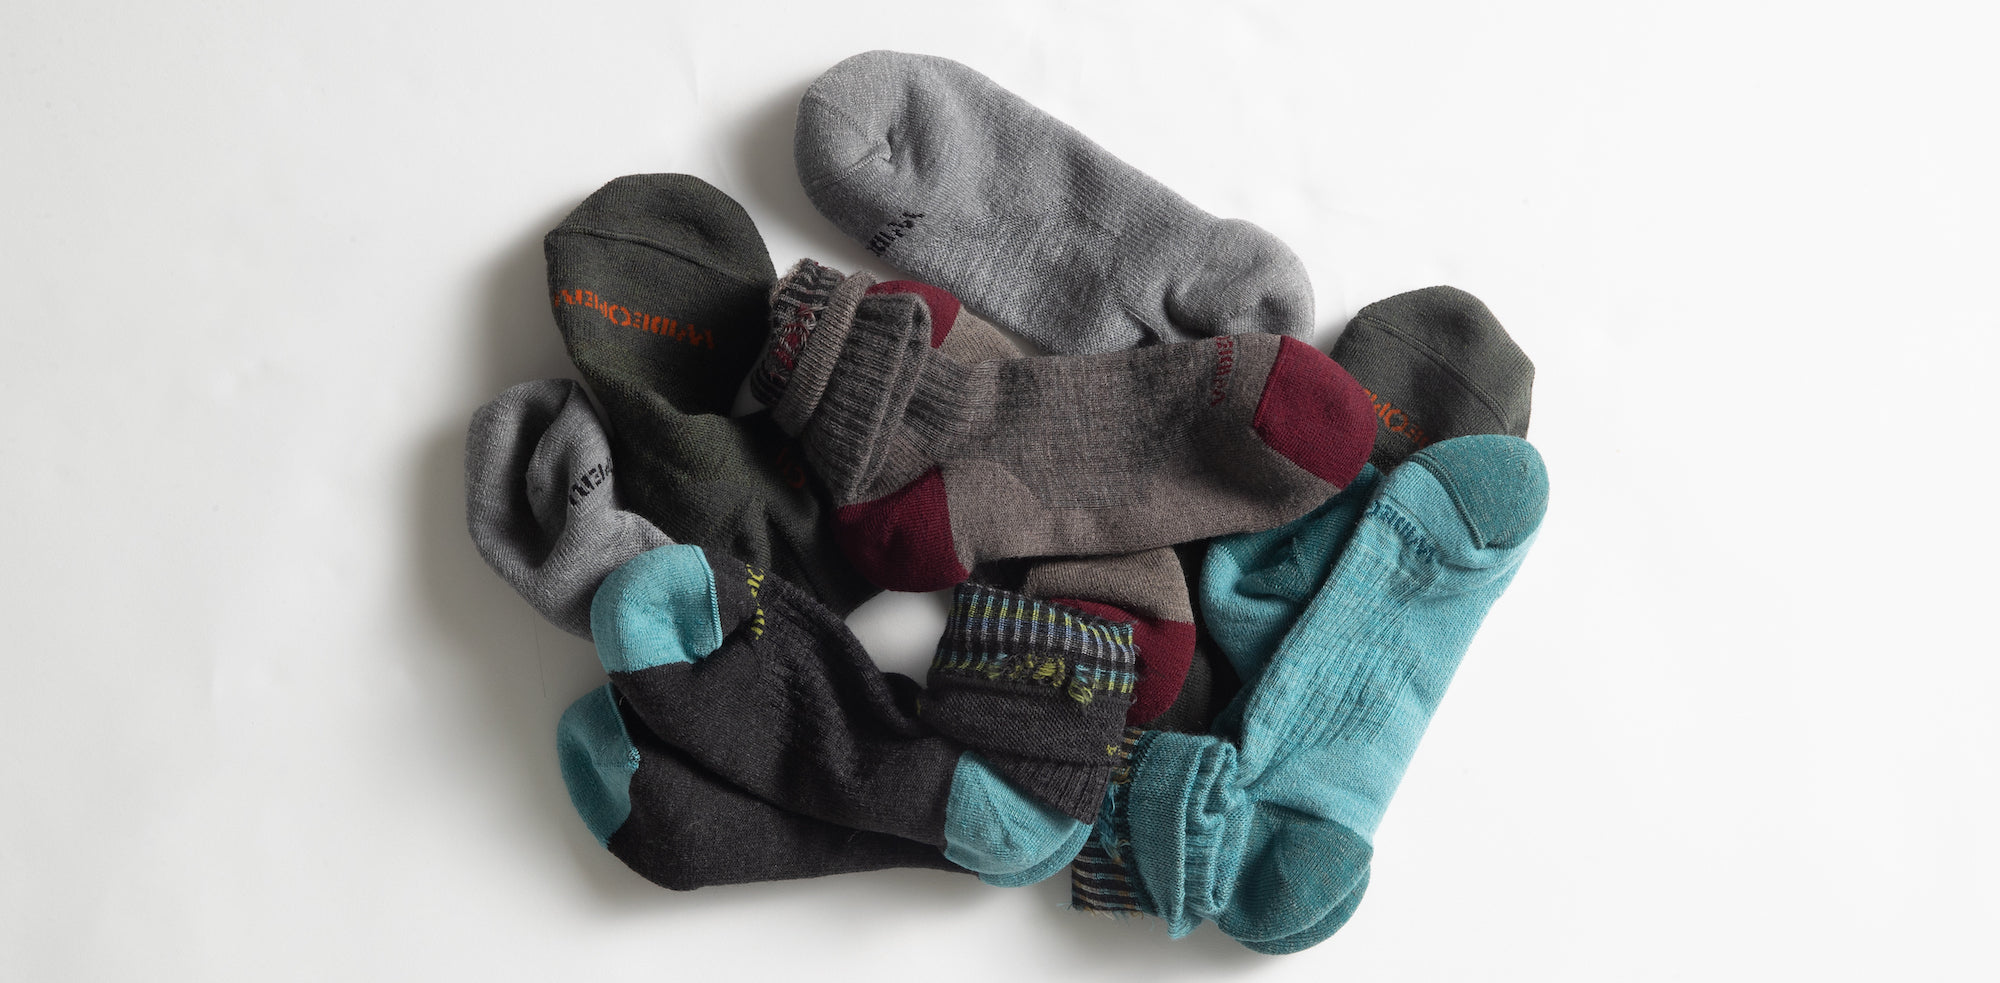 A pile of Wide Open socks roughly bundled together in pairs.